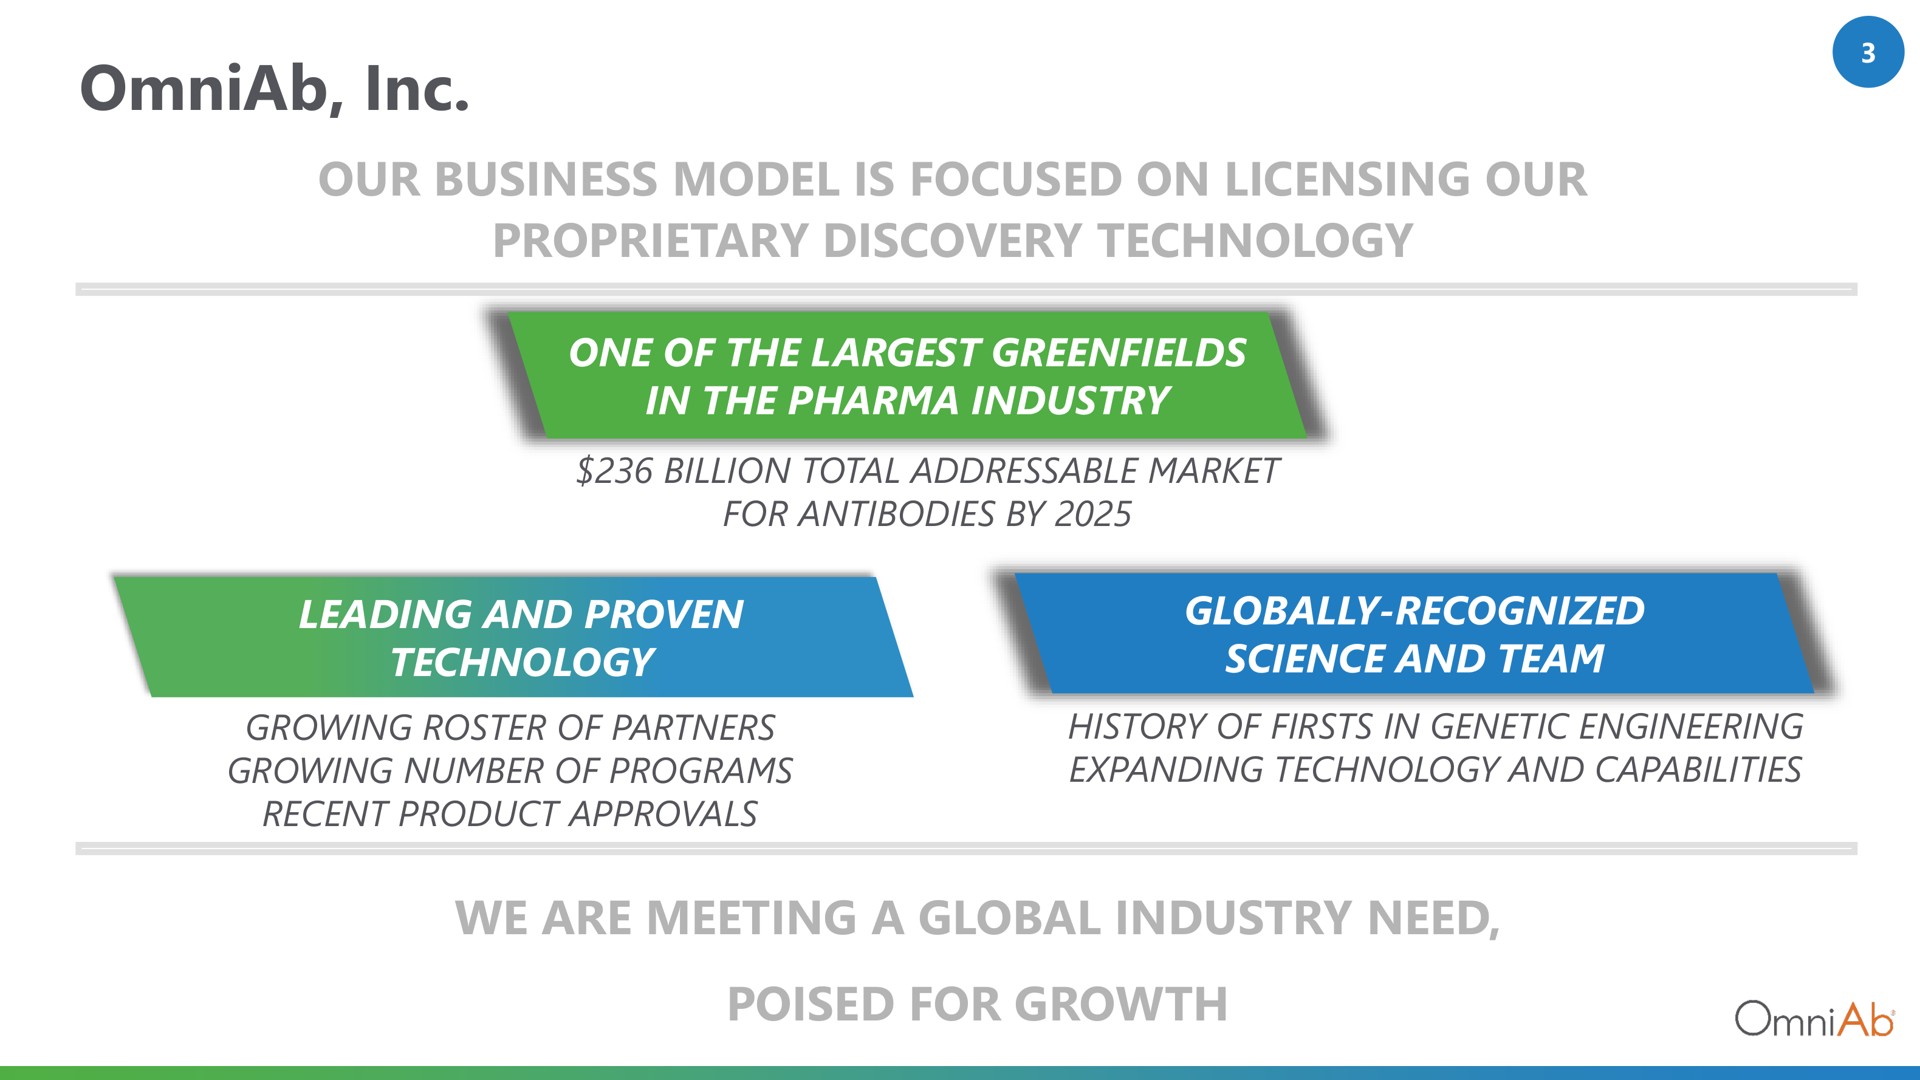 our business model is focused on licensing our proprietary discovery technology we are meeting a global industry need poised for growth | OmniAb